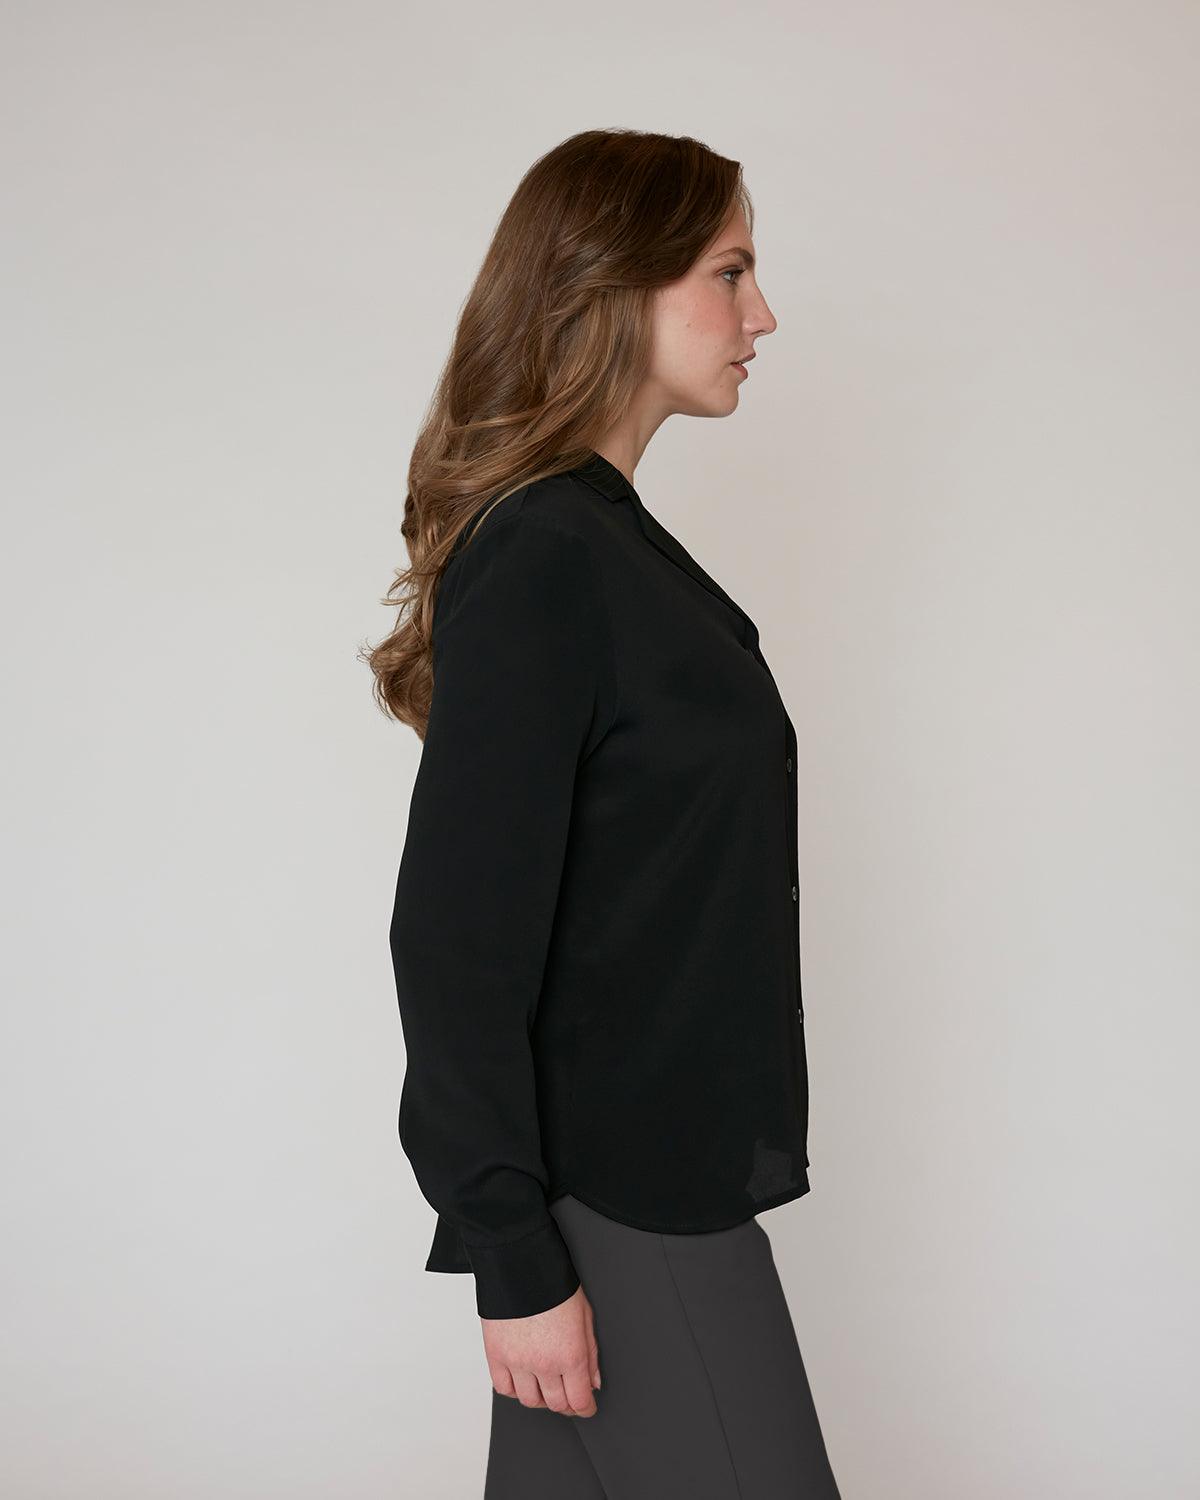 "#color_BLACK| Siobhan is 5'8.5", wearing a size S